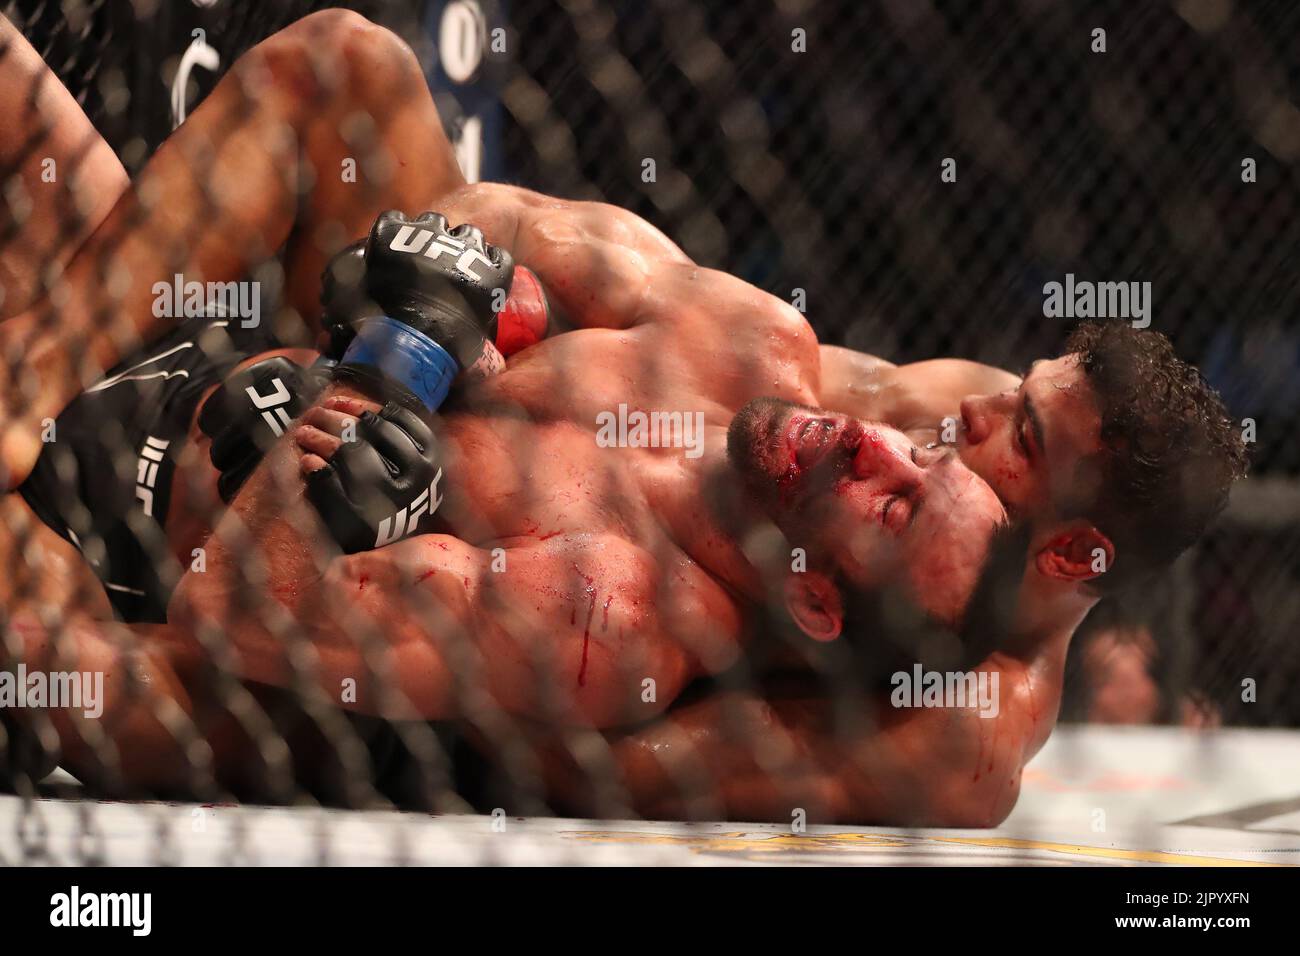 Salt Lake City, United States. 20th Aug, 2022. SALT LAKE CITY, UT - AUGUST 20: (R-L) Paulo Costa controls the body of Luke Rockhold in their Middleweight bout during the UFC 278 at the Vivint Arena on August 20, 2022 in Salt Lake City, Utah, United States. (Photo by Alejandro Salazar/PxImages) Credit: Px Images/Alamy Live News Stock Photo